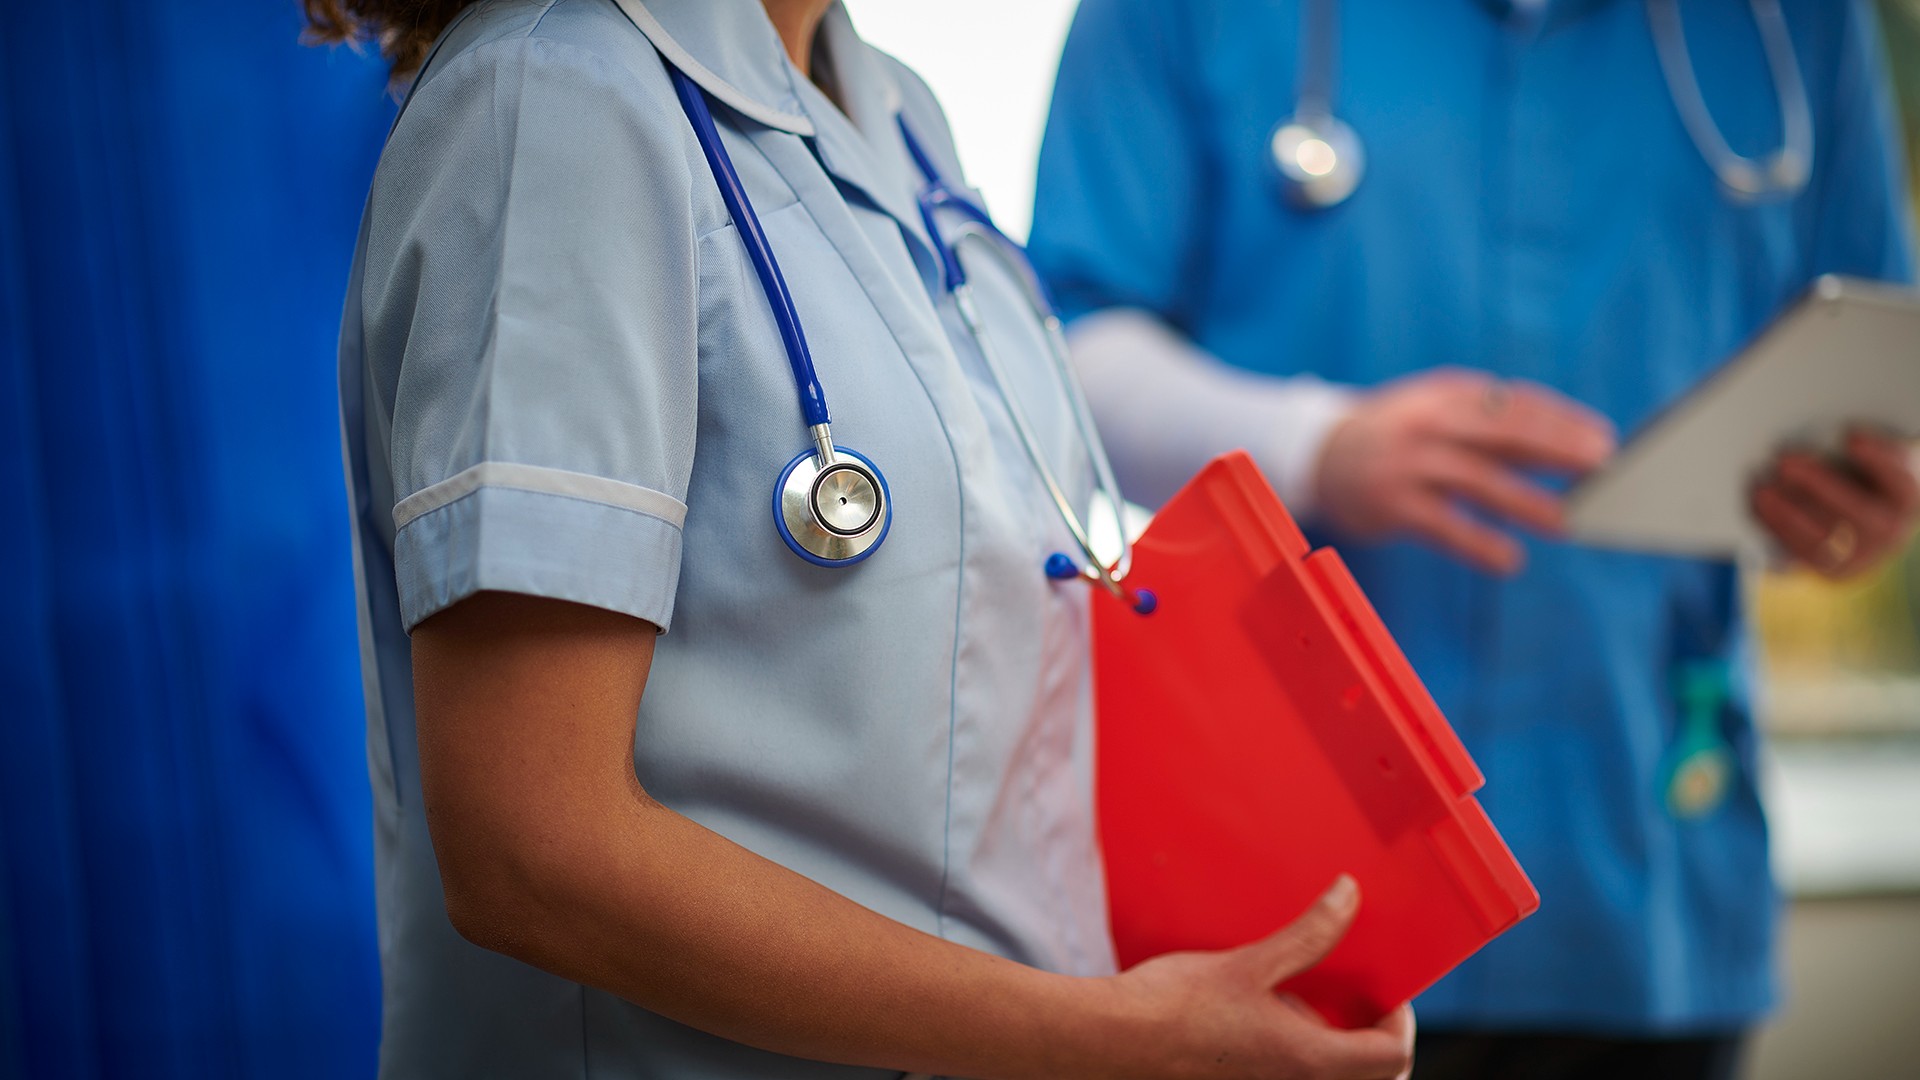 A shot of a student nurse carrying patient notes and a stethoscope